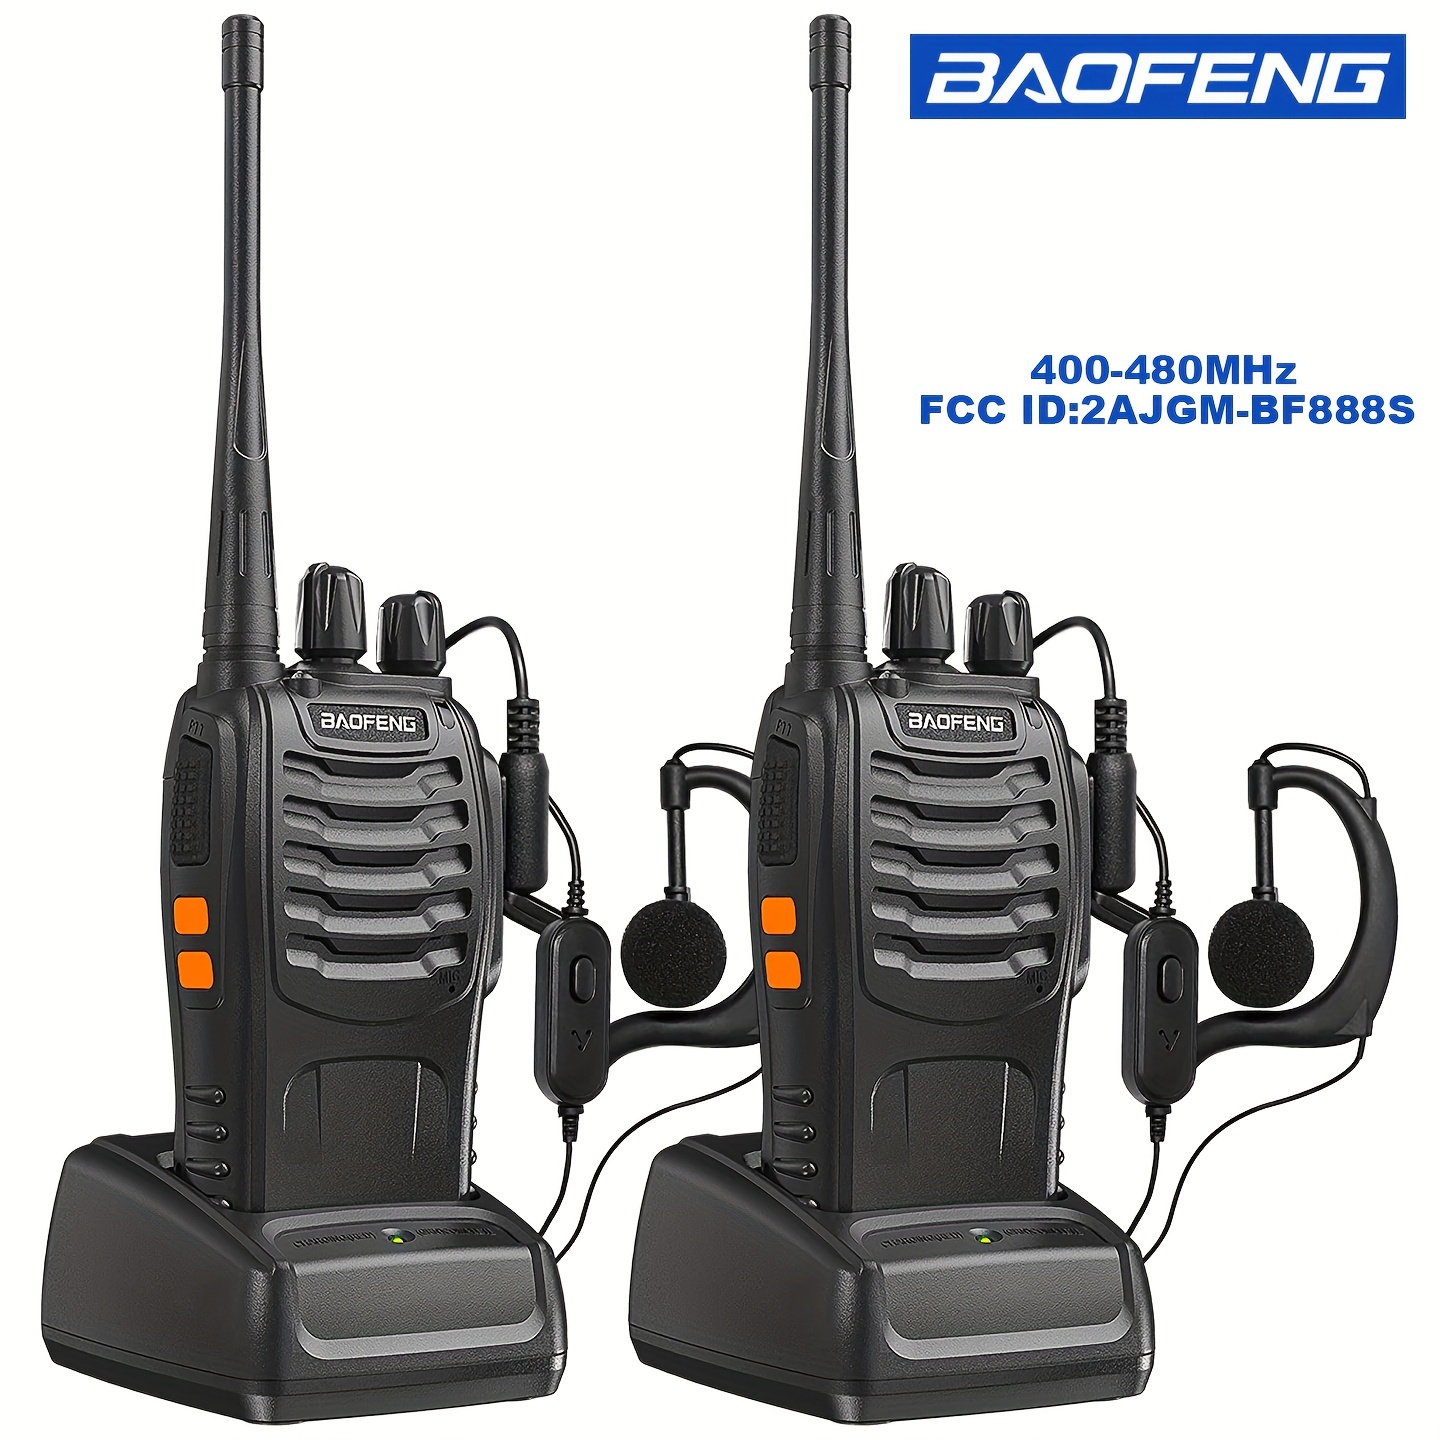 

2pcs Bf-888s Handheld 2 Way Radio - Uhf Portable Walkie Talkies For Adults, Ideal For Hiking, Biking, And Camping - Clear Communication And Long Range Connectivity